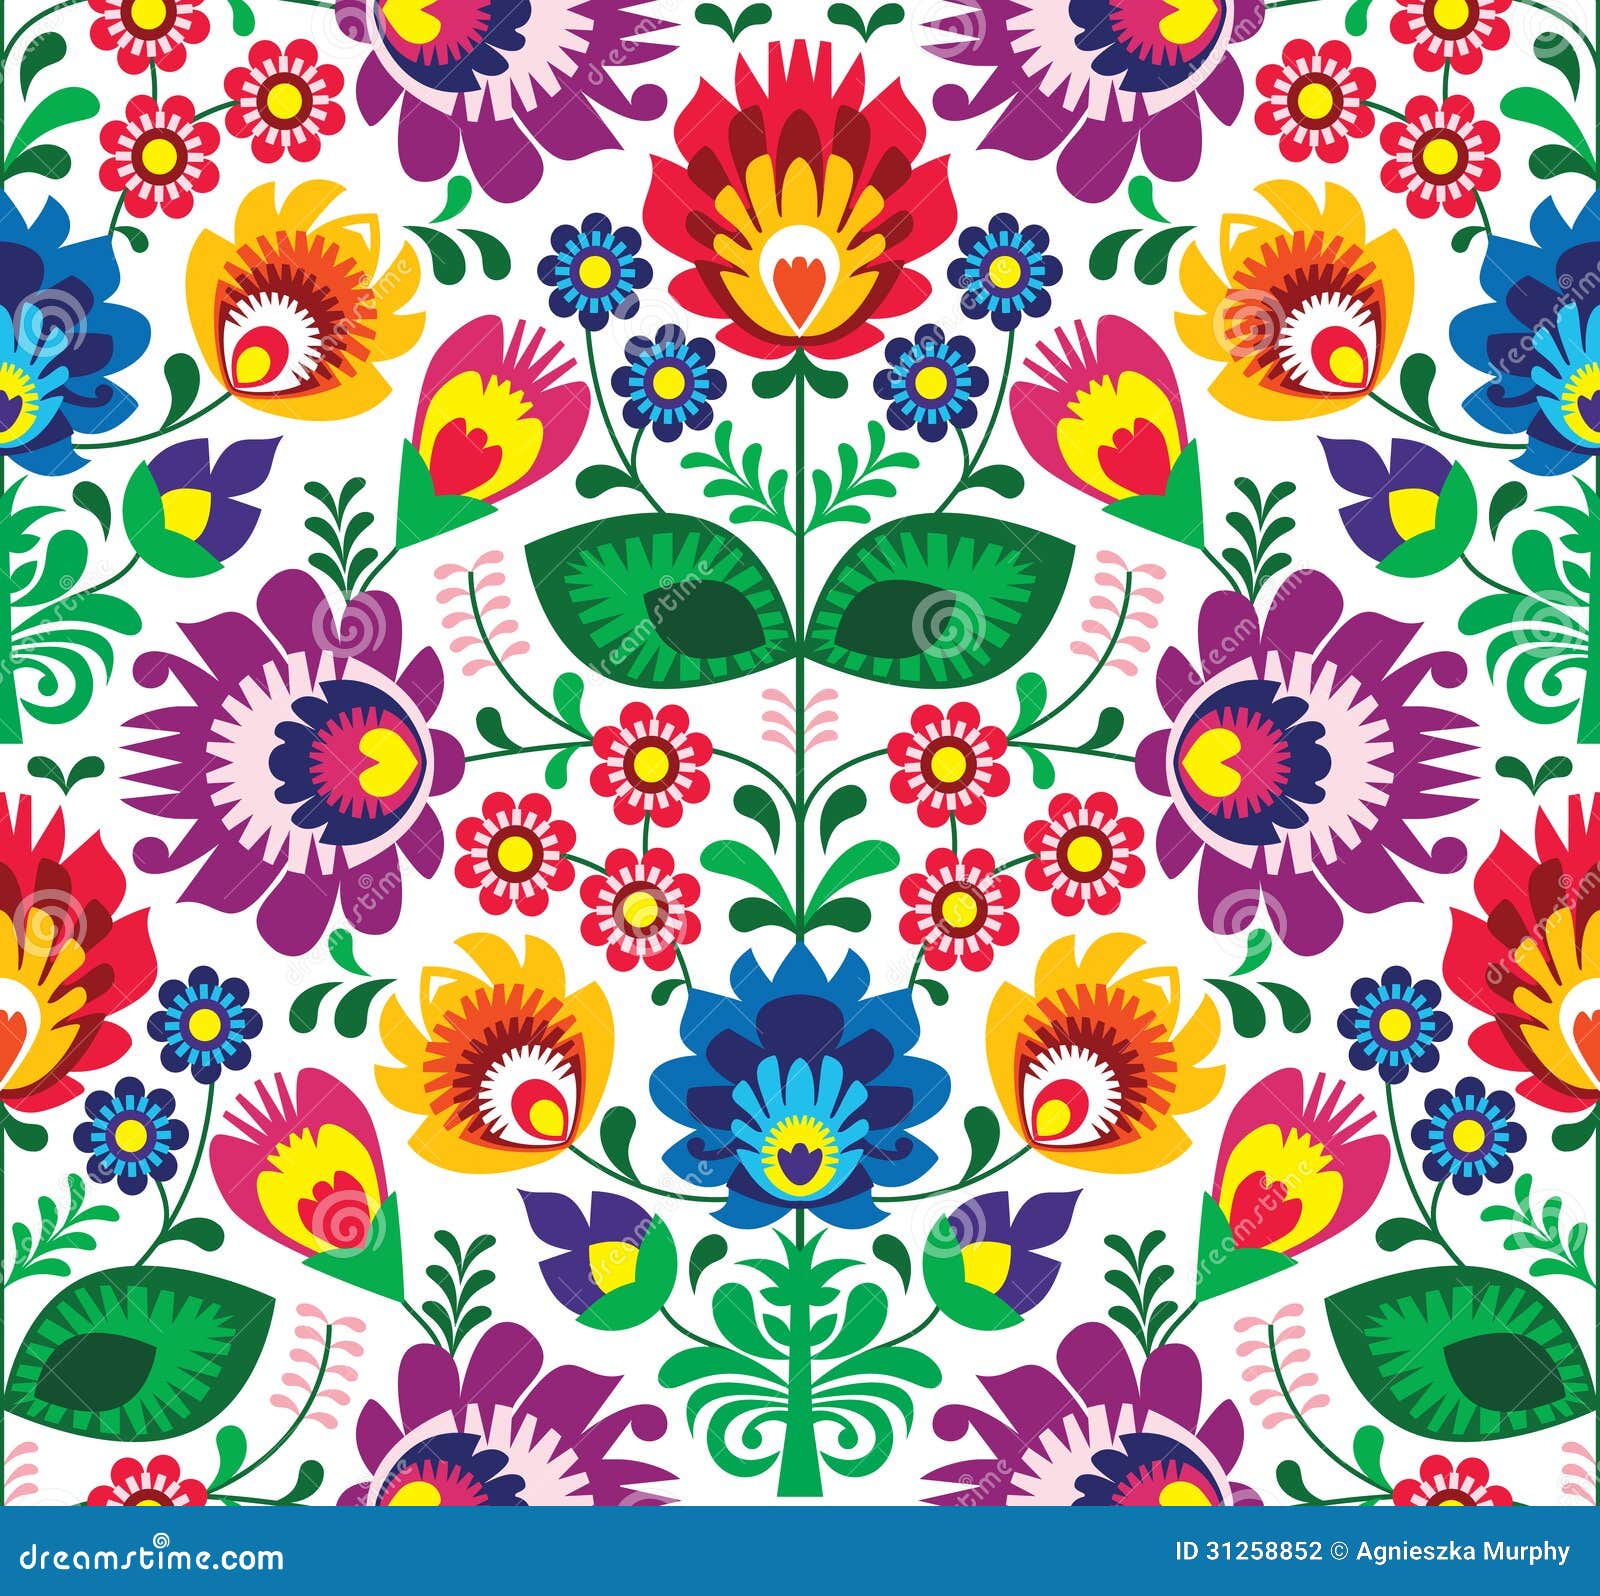 seamless traditional floral polish pattern - ethnic background